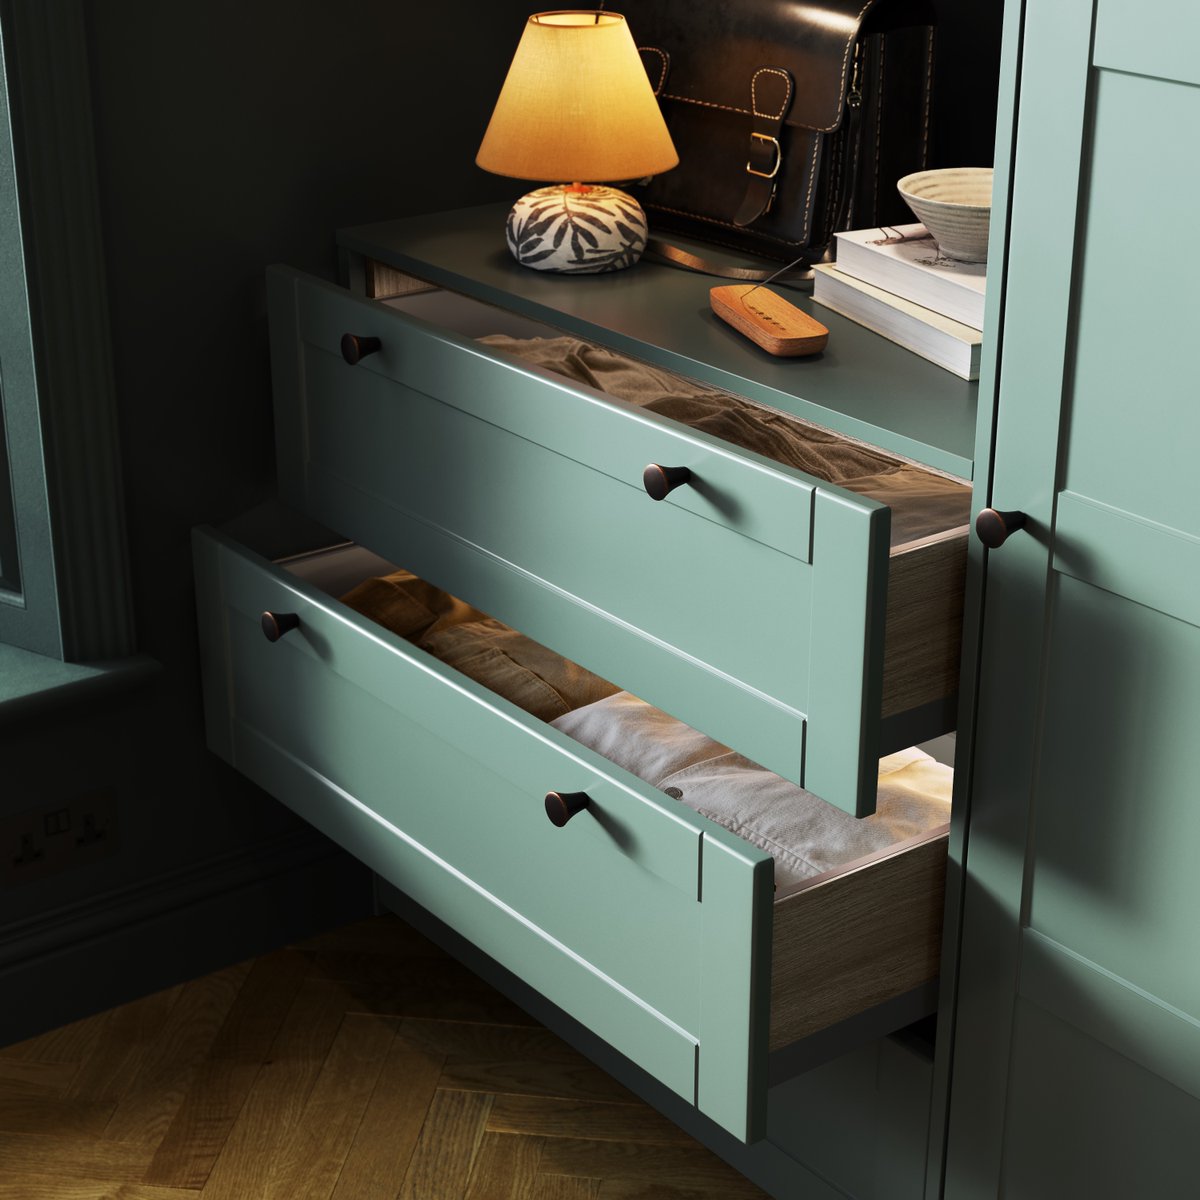 Our Shaker 5 Panel chest of drawers boast traditional frontals in a matt finish combined with deep pull-out drawers, creating a stylish solution for bedroom storage. 

#wrenkitchens #wrenovation #wardrobedesign #chestofdrawers #homeinteriors #fittedbedroom #bedroomfurniture